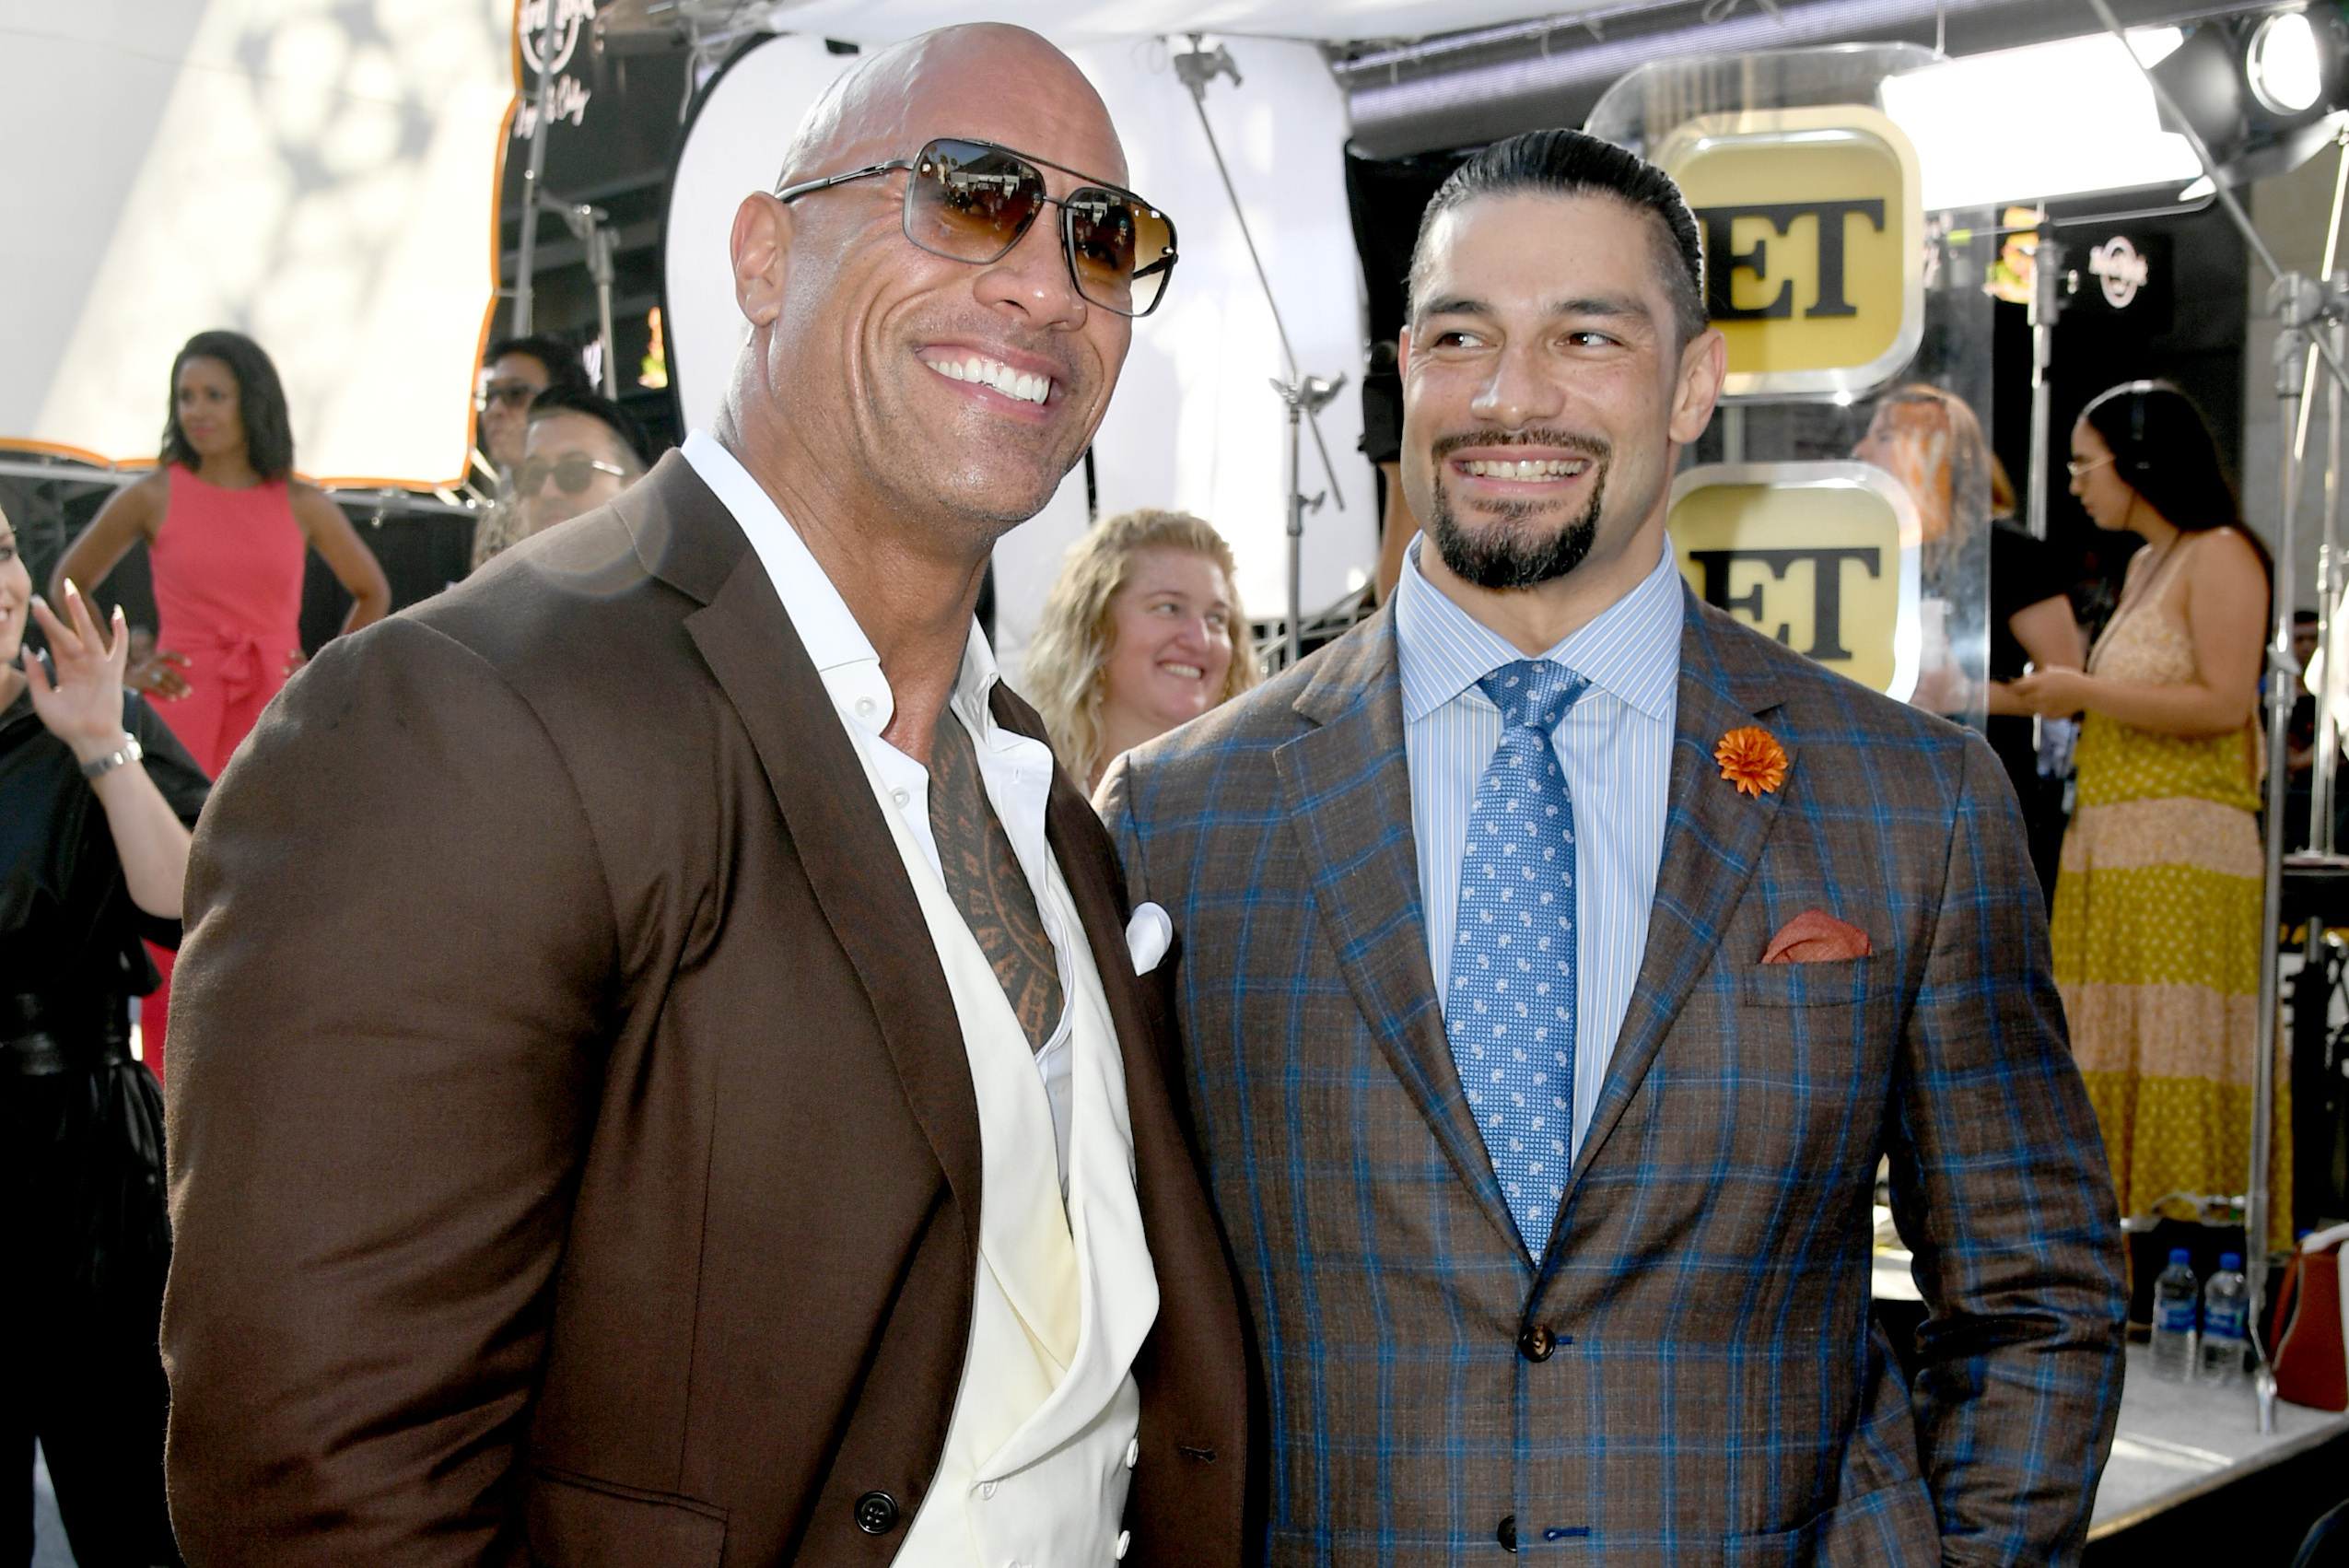 roman reigns and the rock related